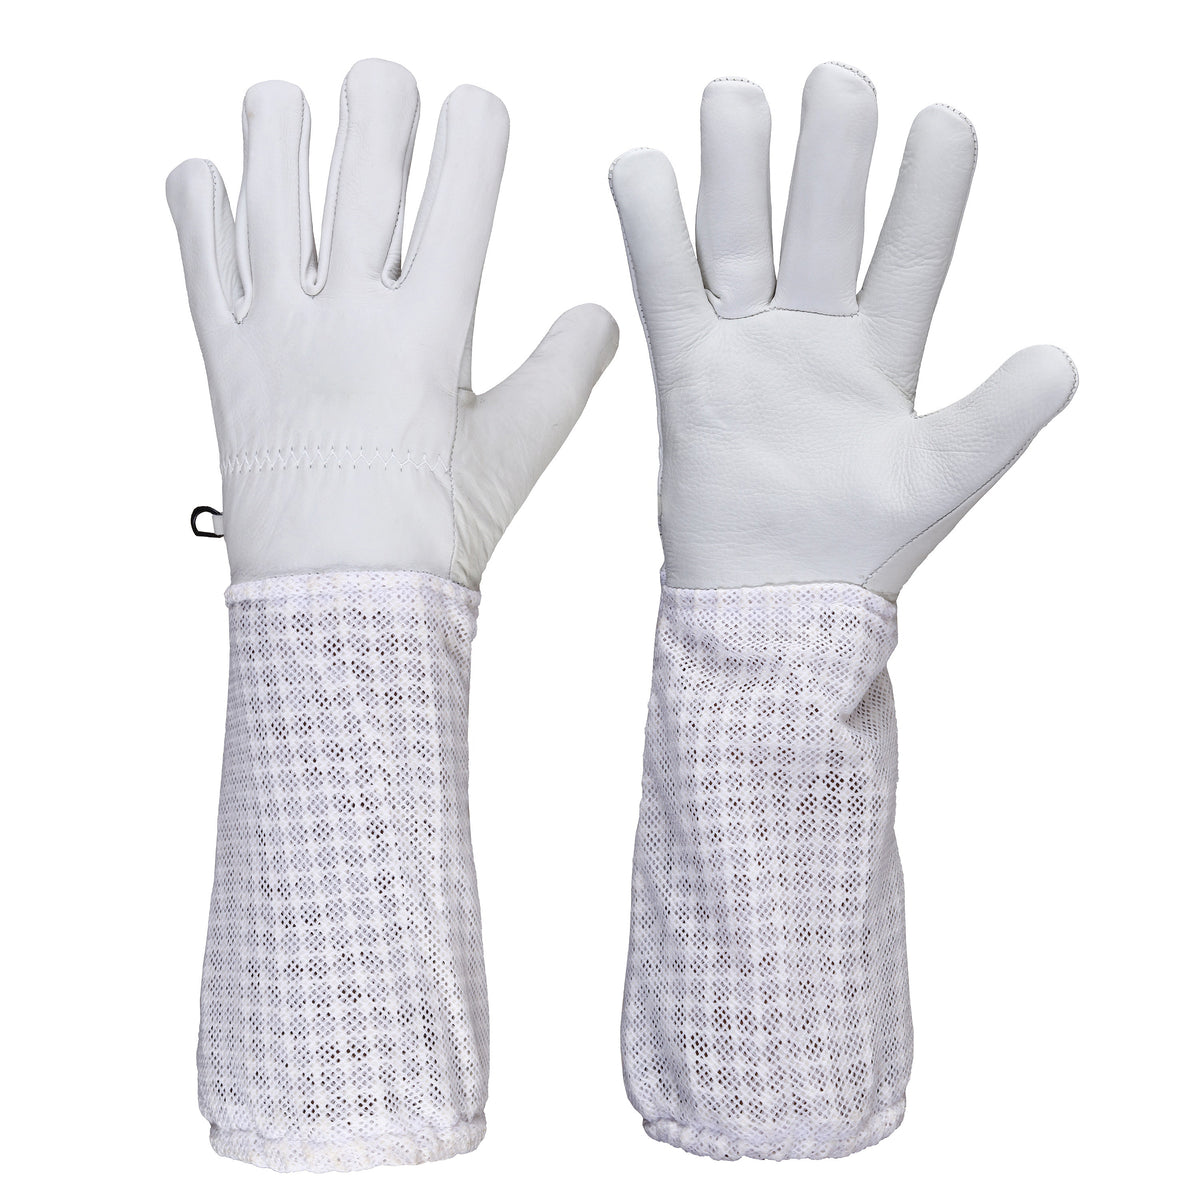 Goatskin Beekeeping Gloves with 3 Layers Ventilation Cuff 